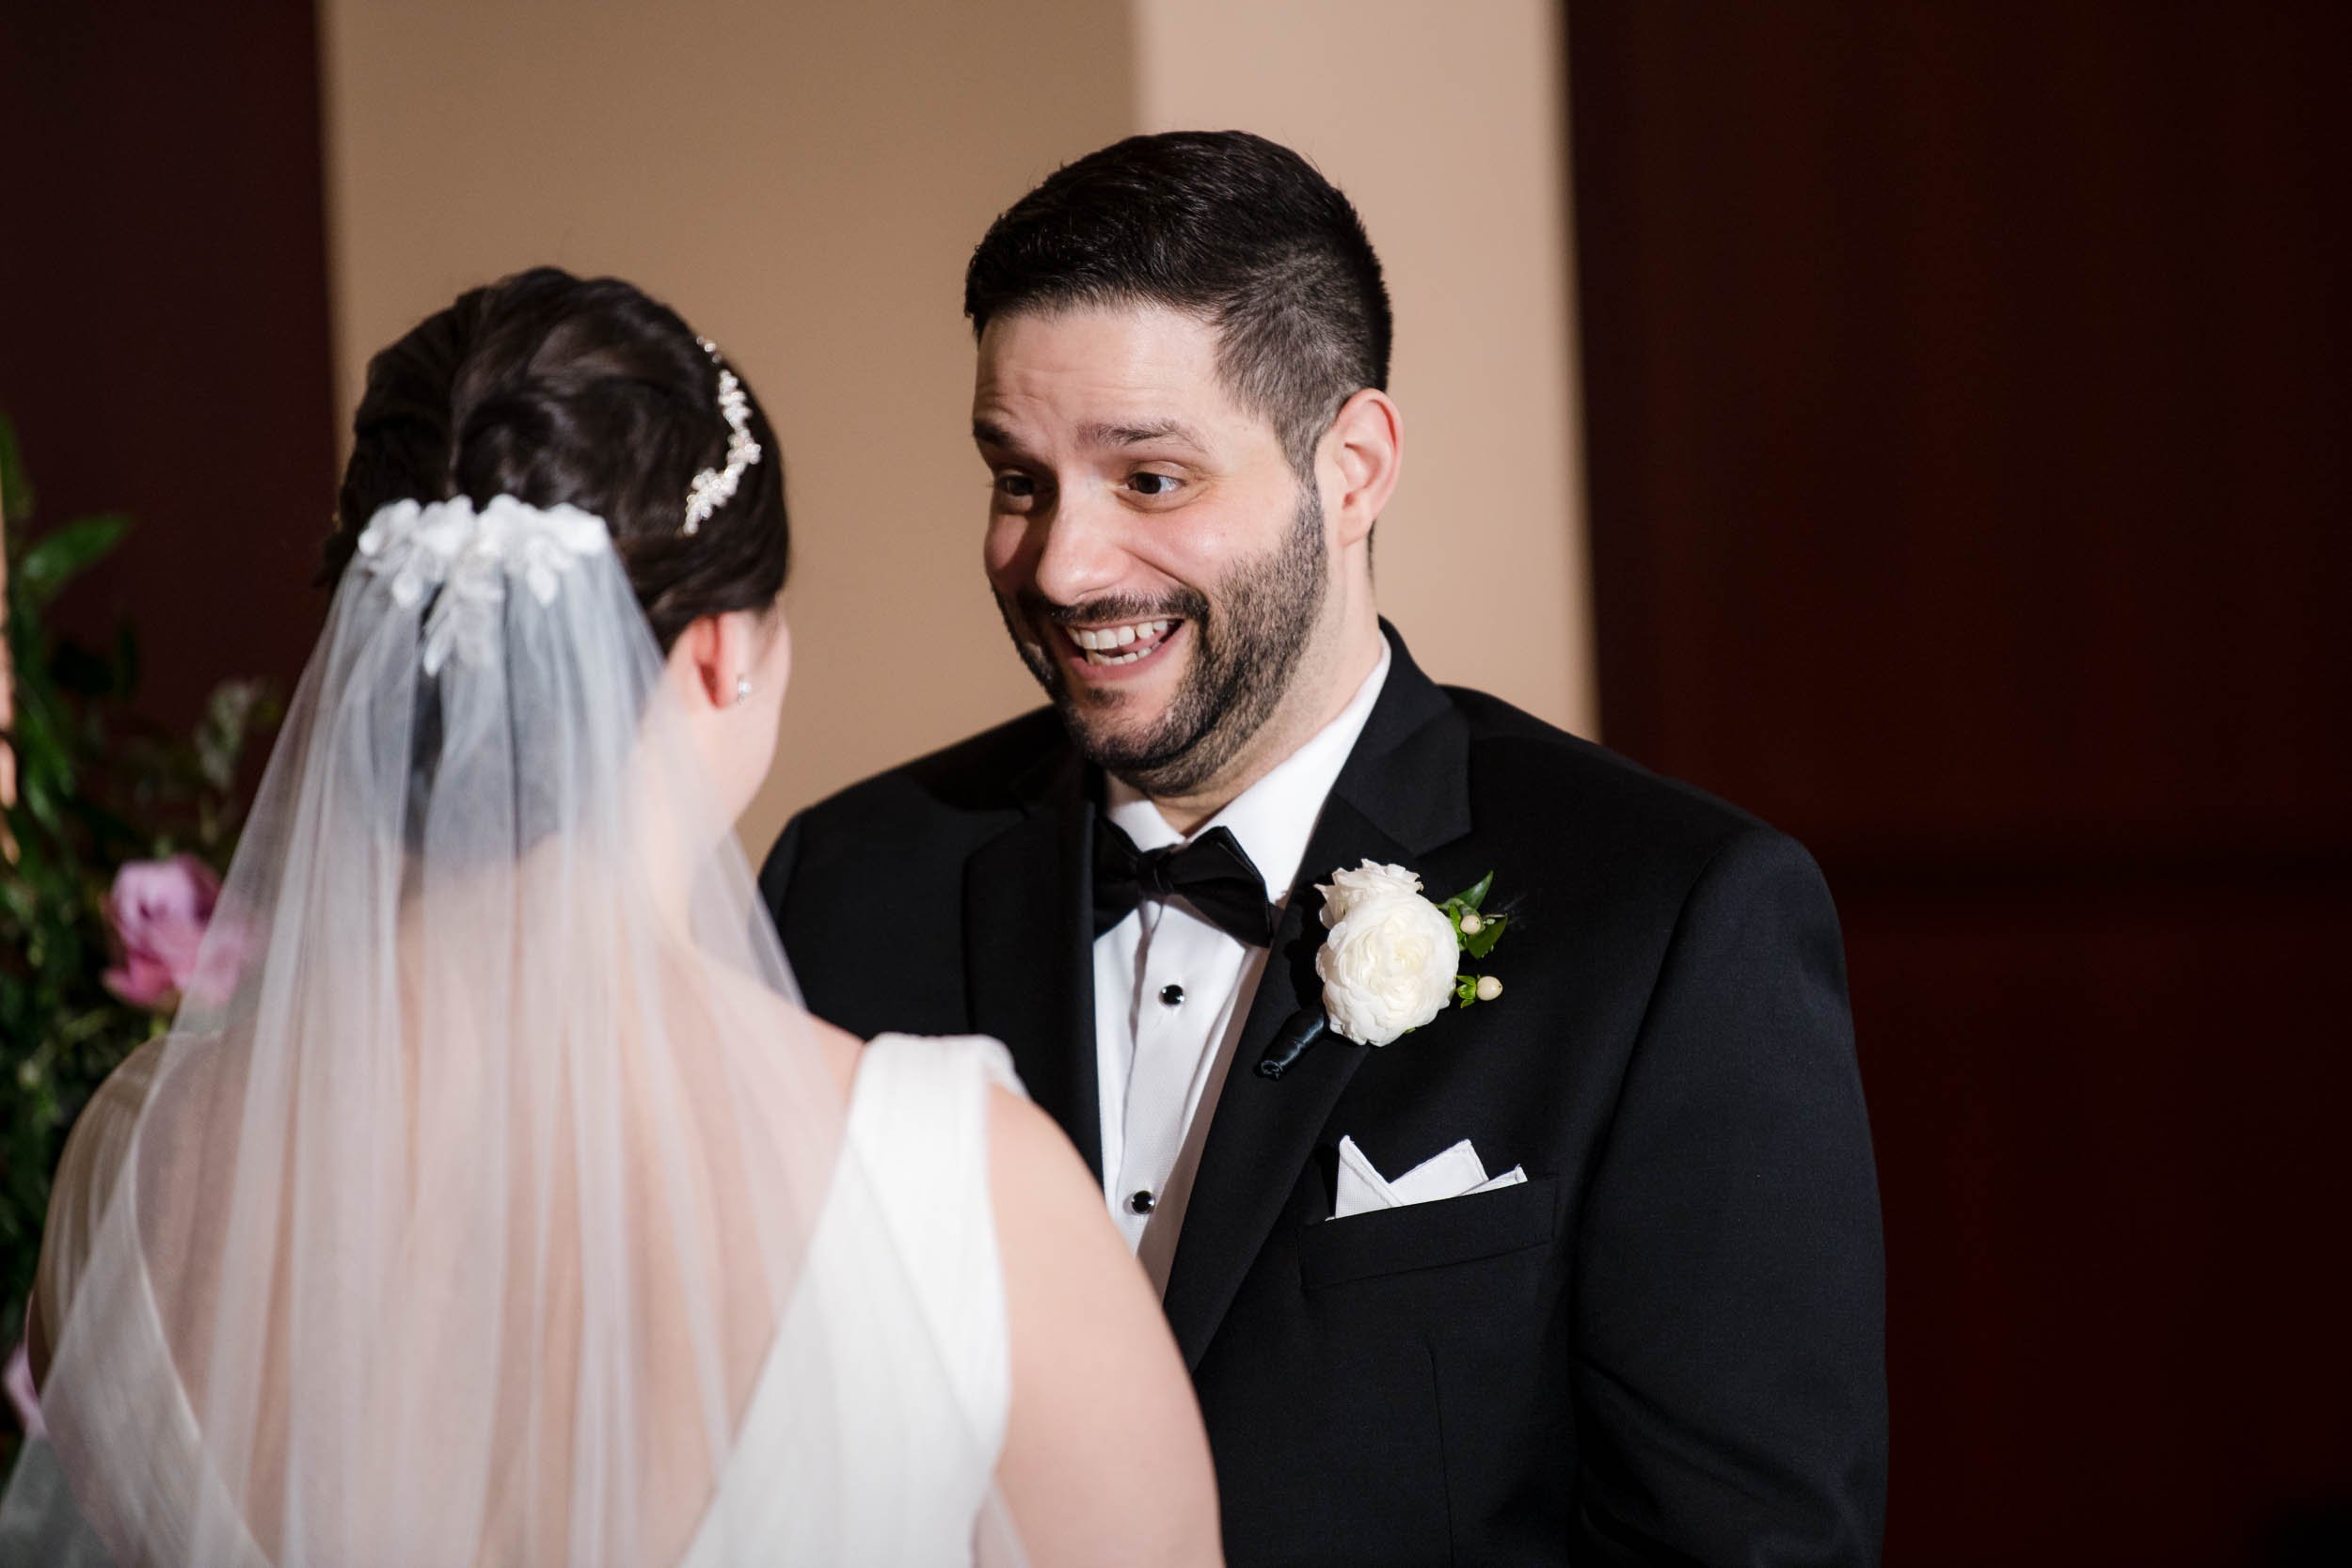 Best Wedding Photographers Near Me | Newberry Library | J. Brown Photography | grooms smiles to his bride at ceremony.